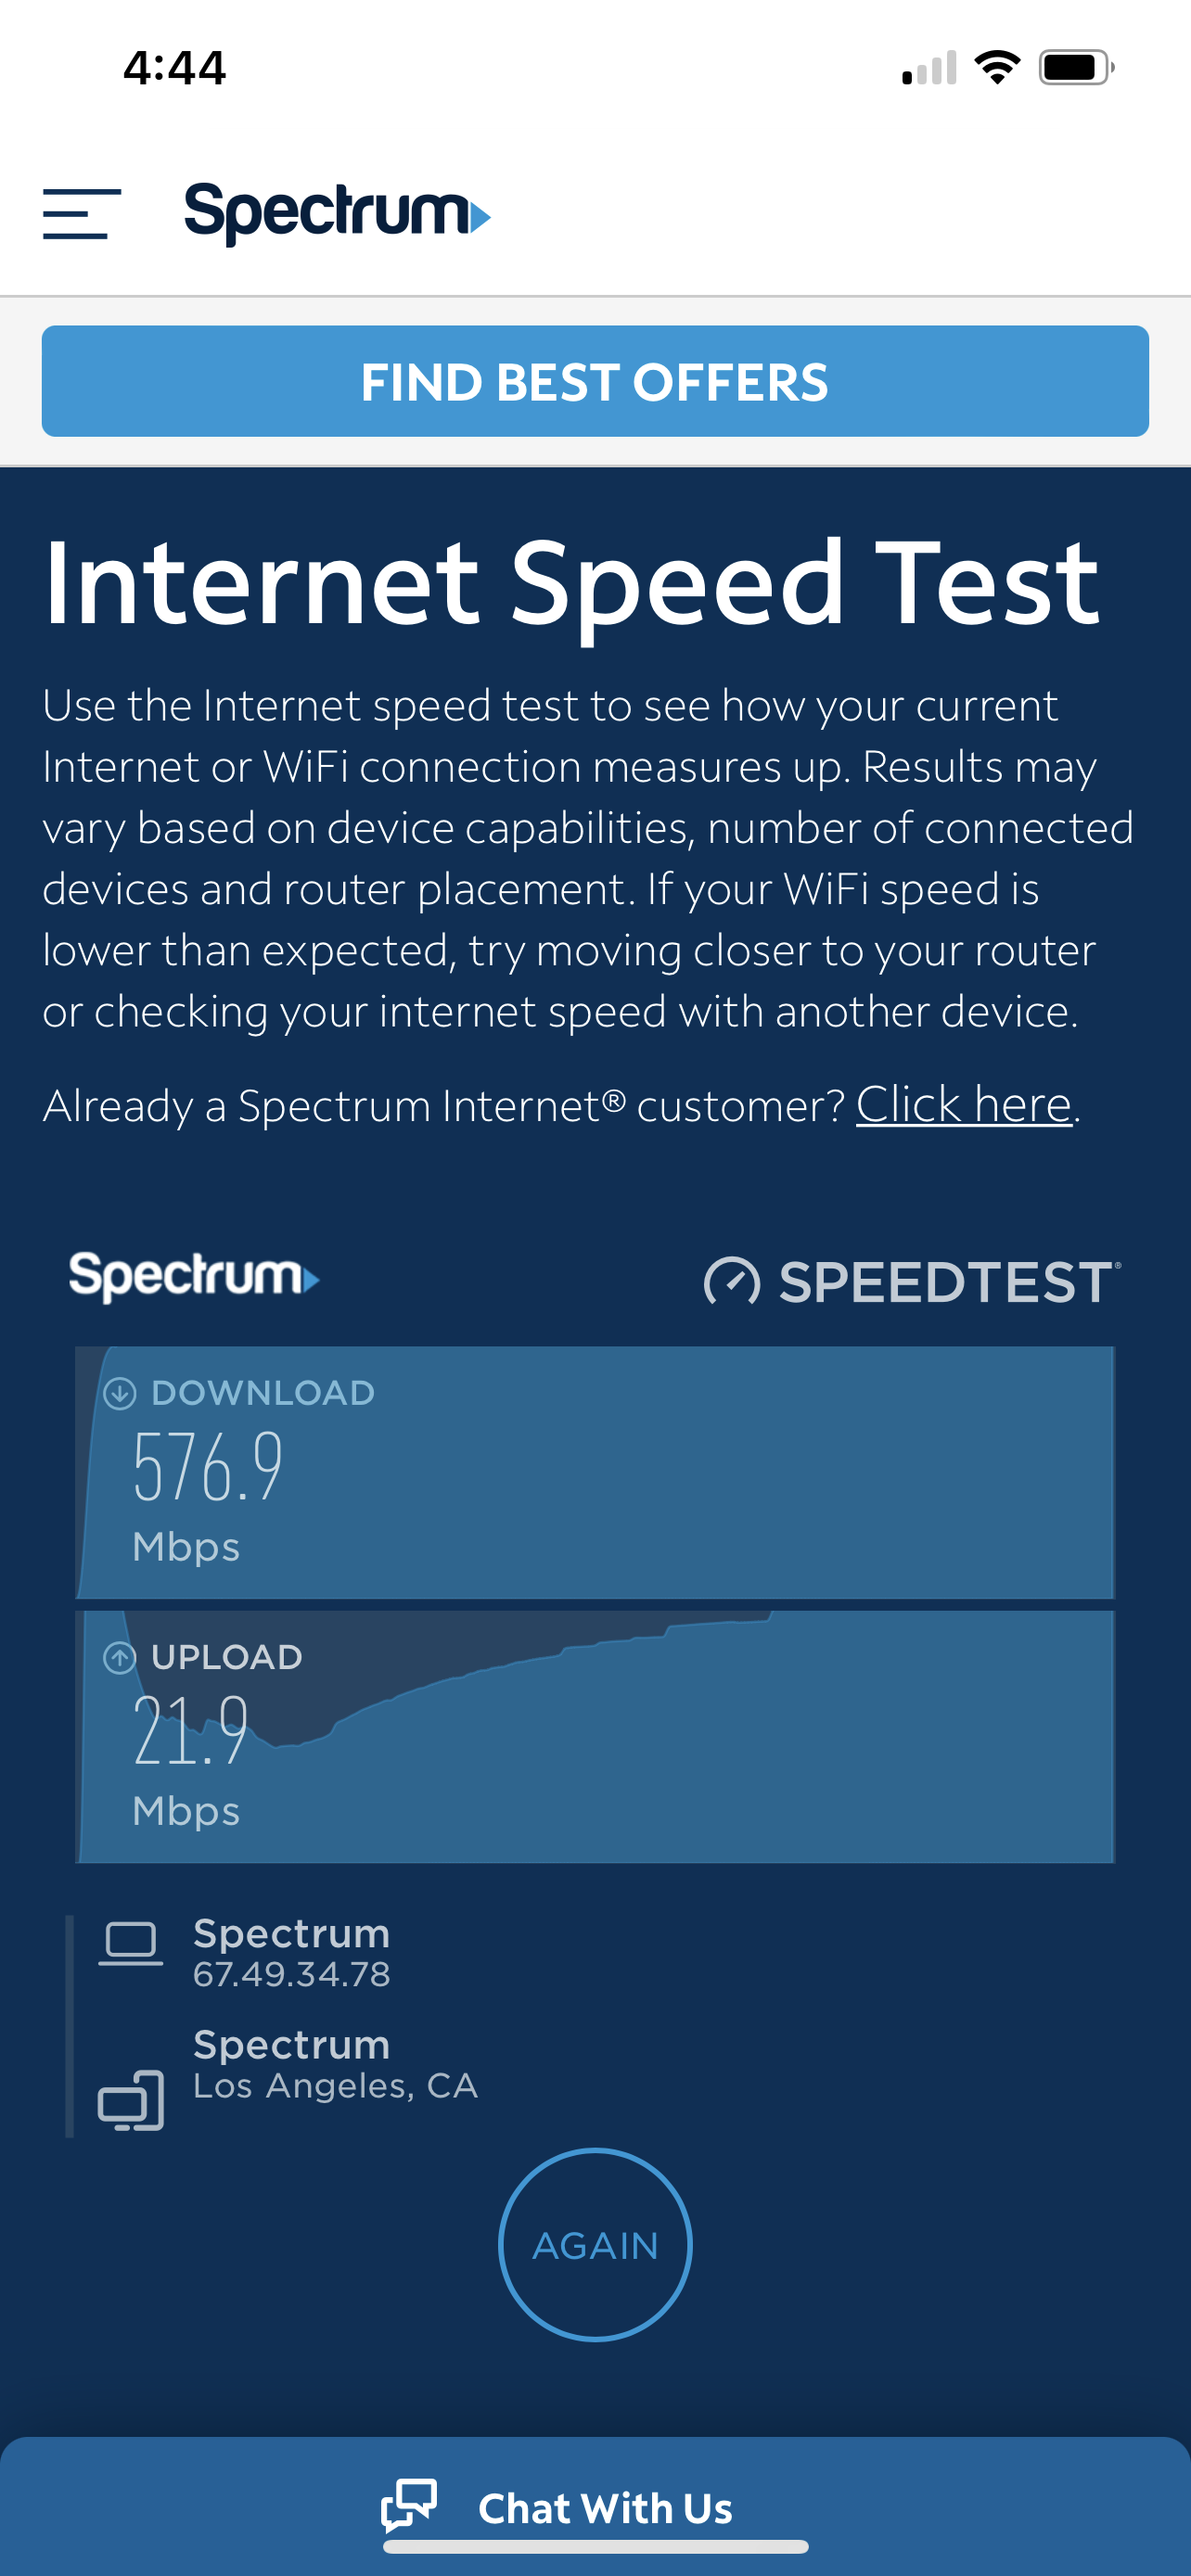  WiFi has 475-500 Mbps download speed. 